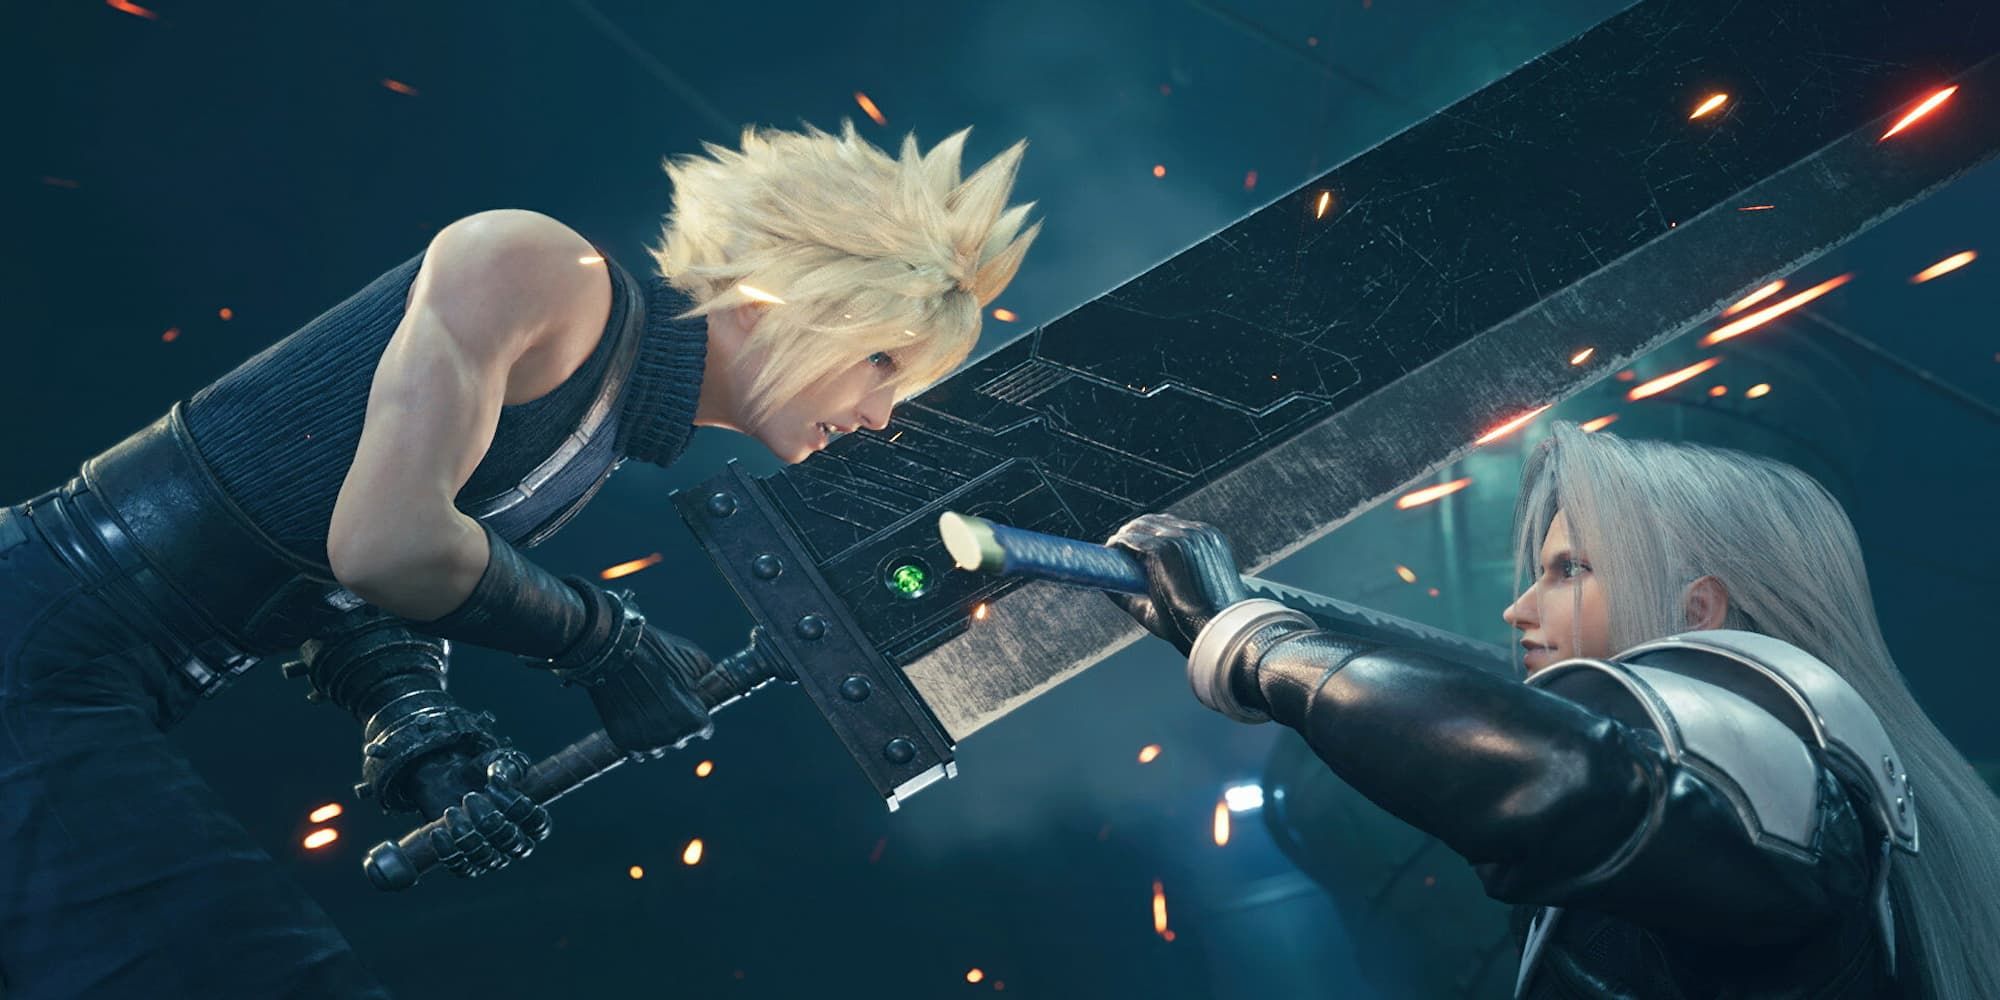 Sephiroth (right) Blocking Clouds (left) Attack